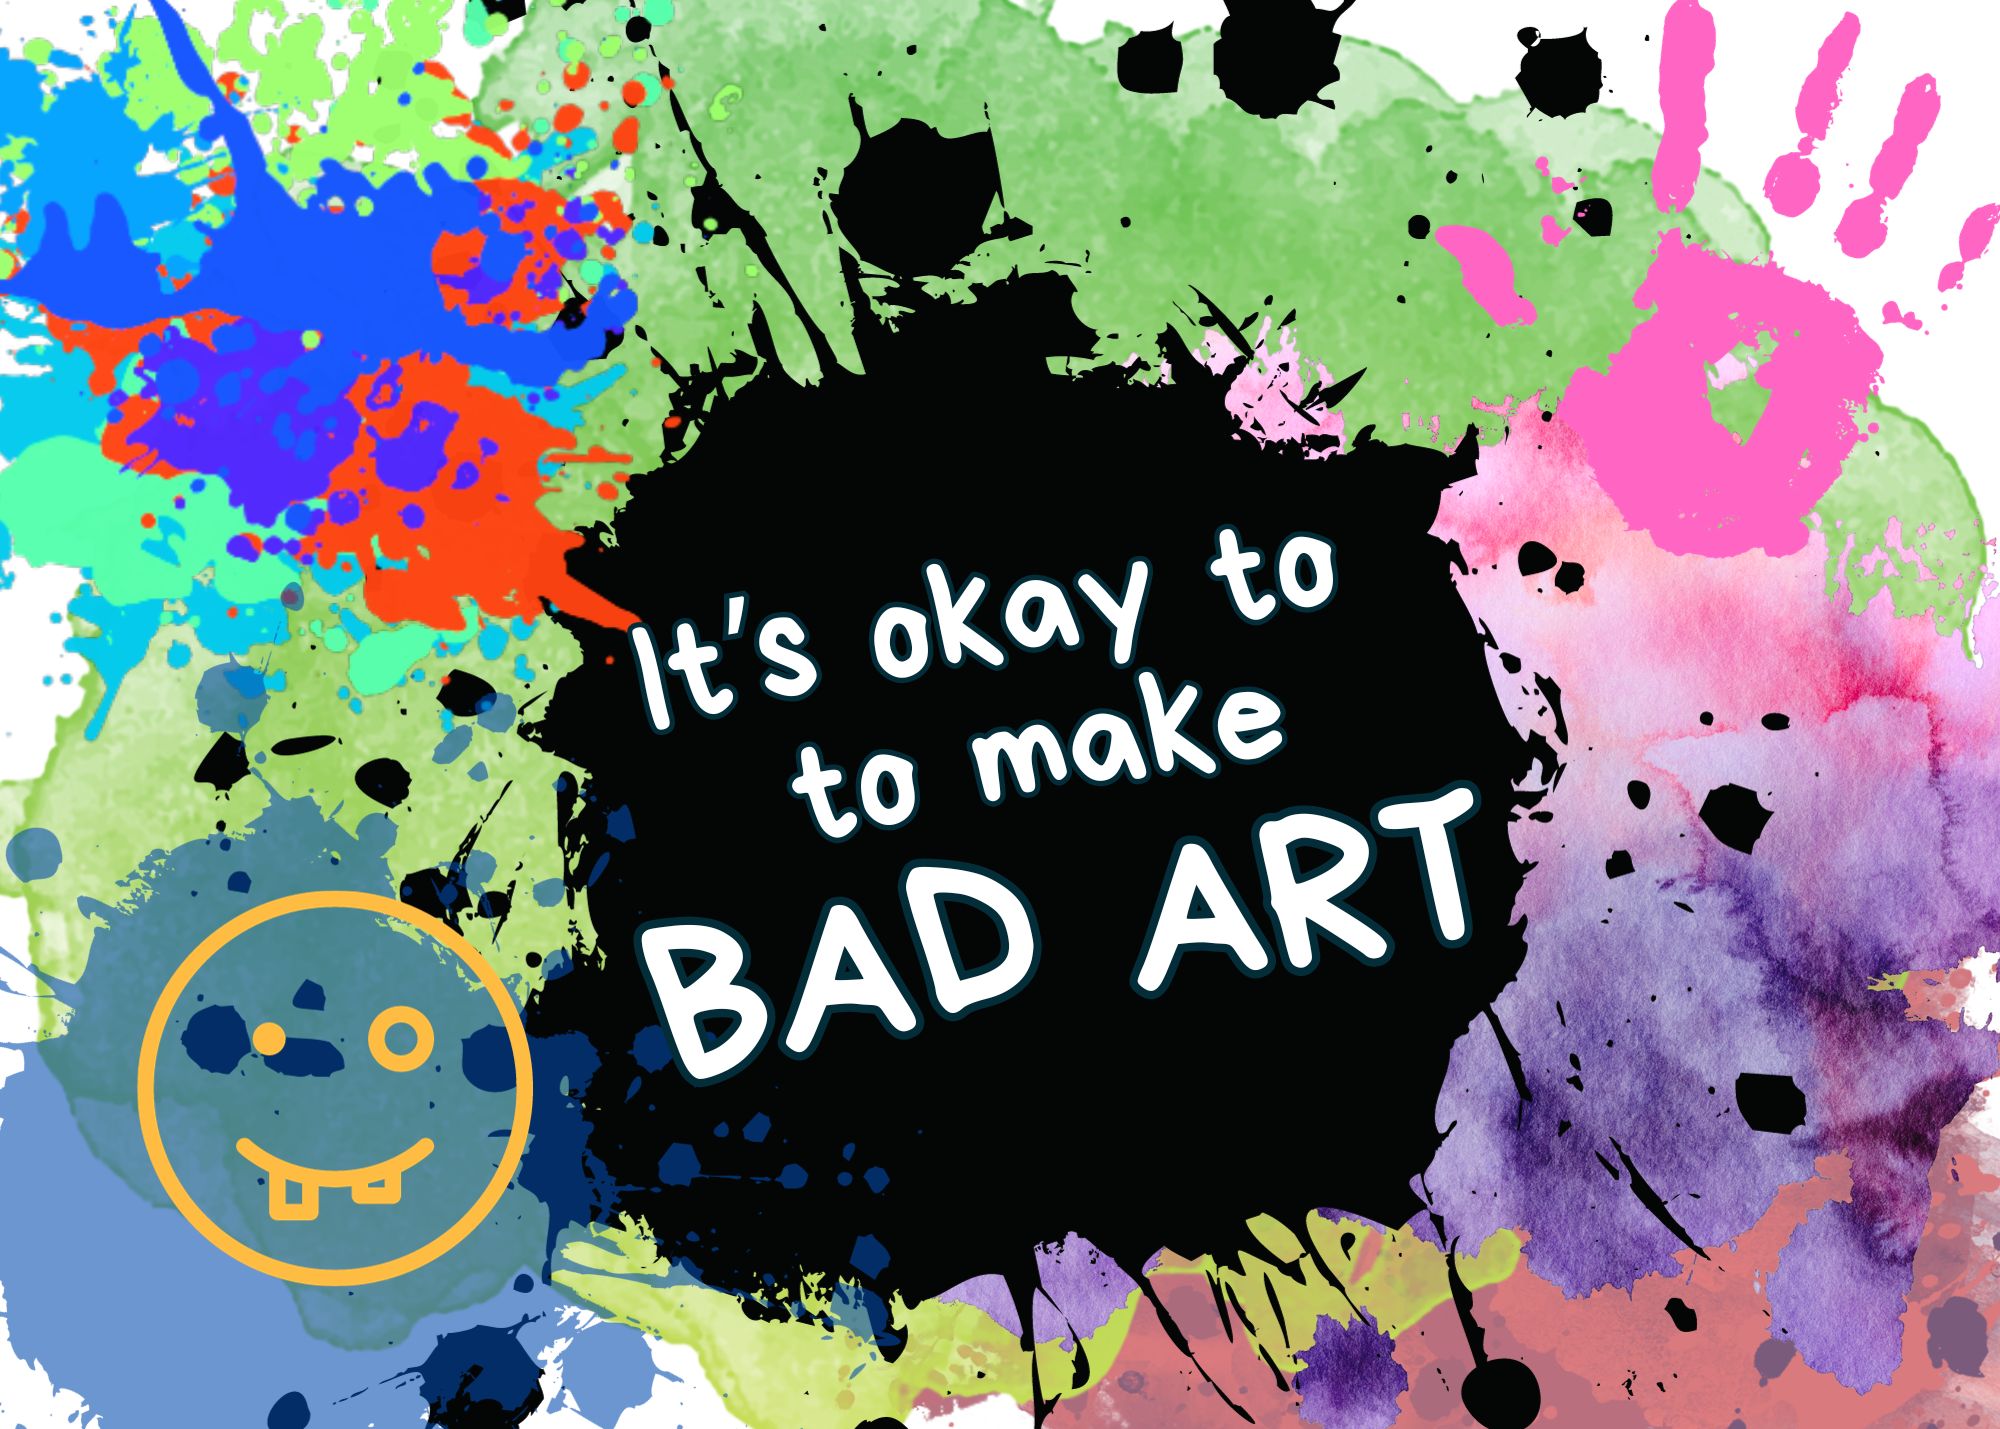 Background of paint splotches with text "It's okay to make bad art"